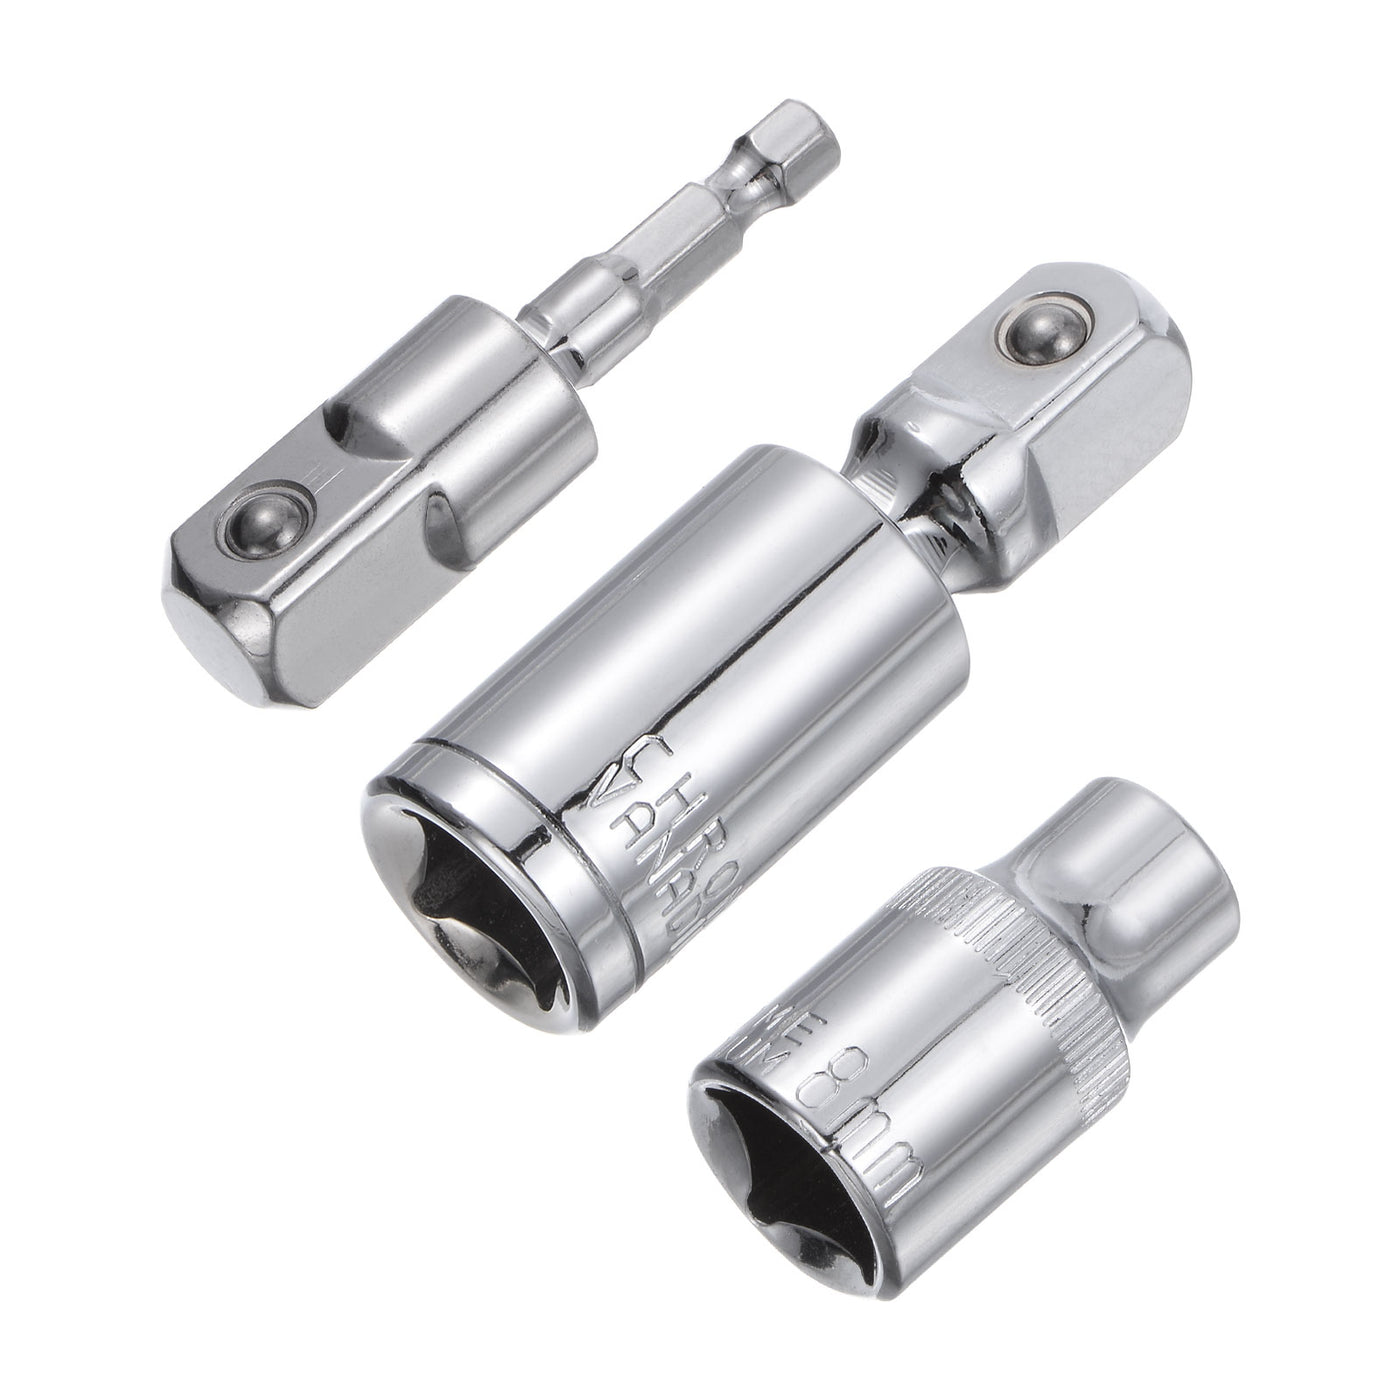 uxcell Uxcell 1/2" Drive 8mm Shallow Socket Swivel Joints Hex Shank Impact Driver Adaptor Set